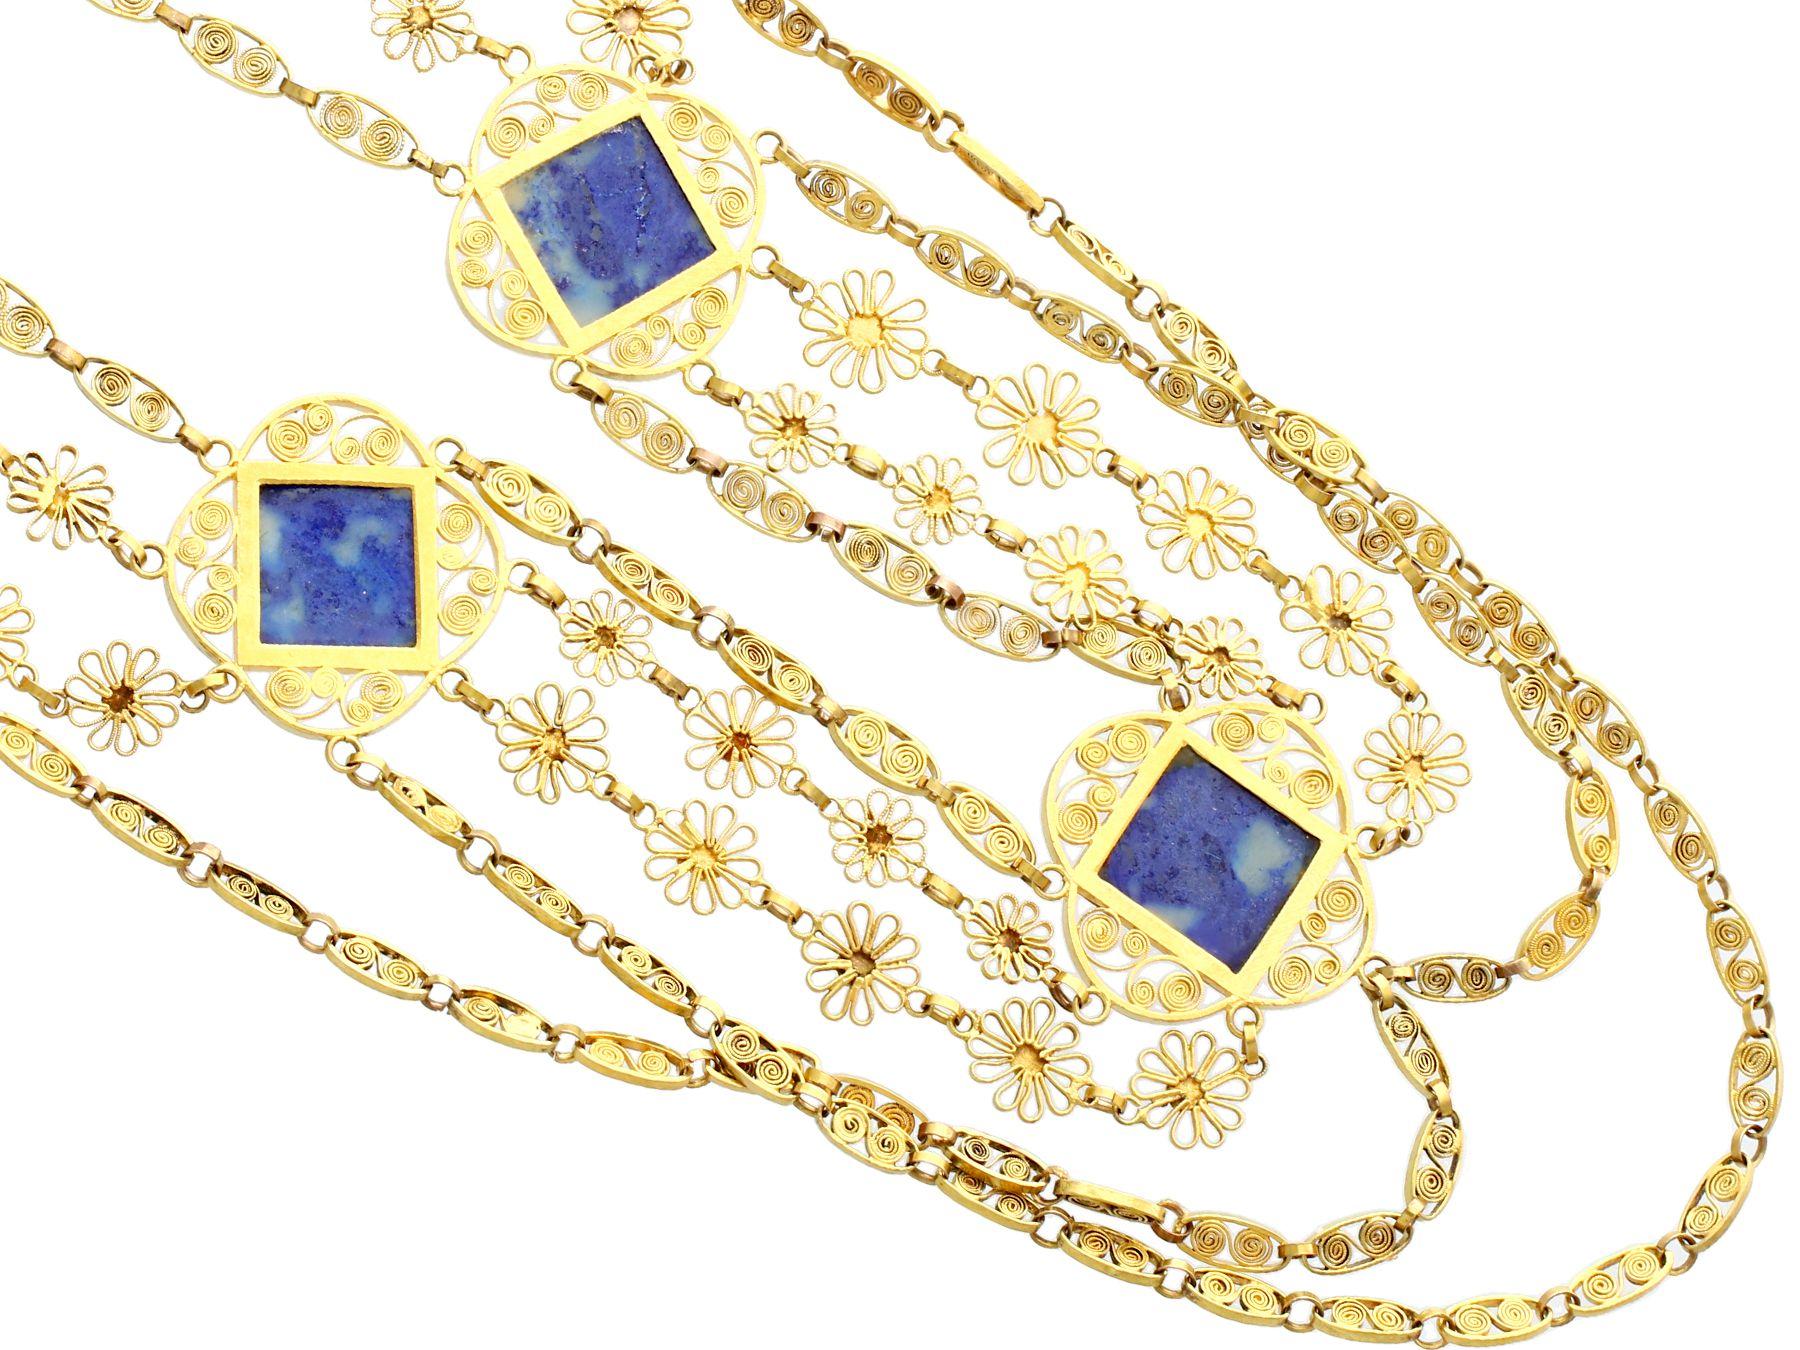 Antique Victorian 5.55 Carat Lapis Lazuli Yellow Gold Necklace In Excellent Condition For Sale In Jesmond, Newcastle Upon Tyne